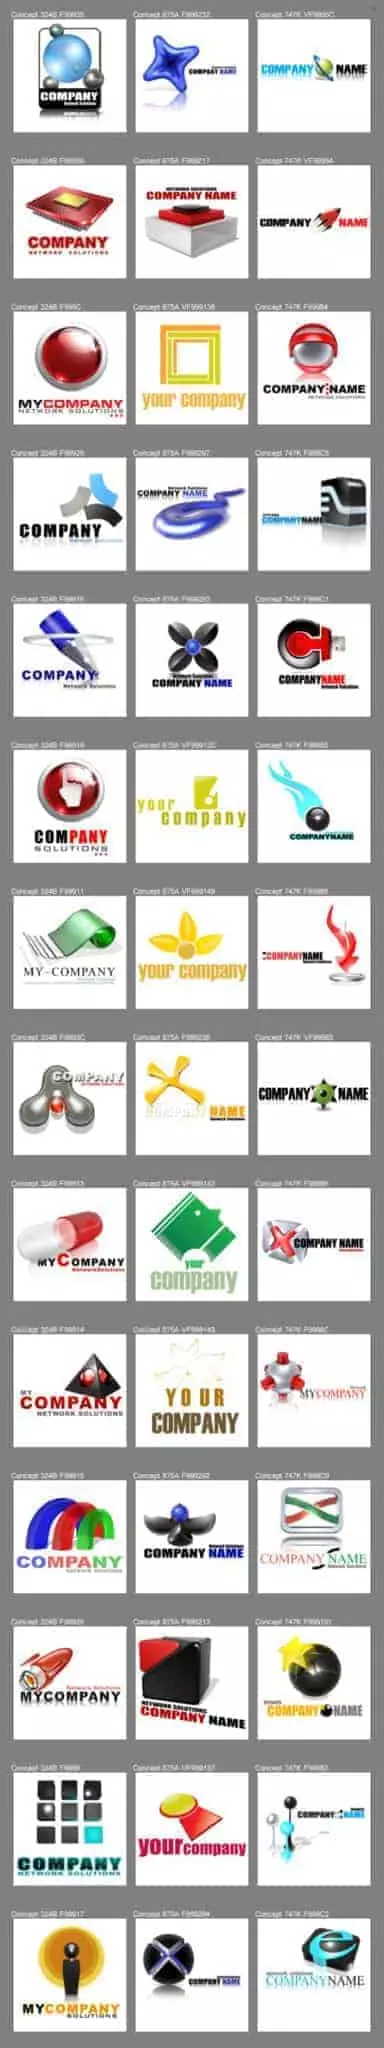 what elements go into making a logo great 5